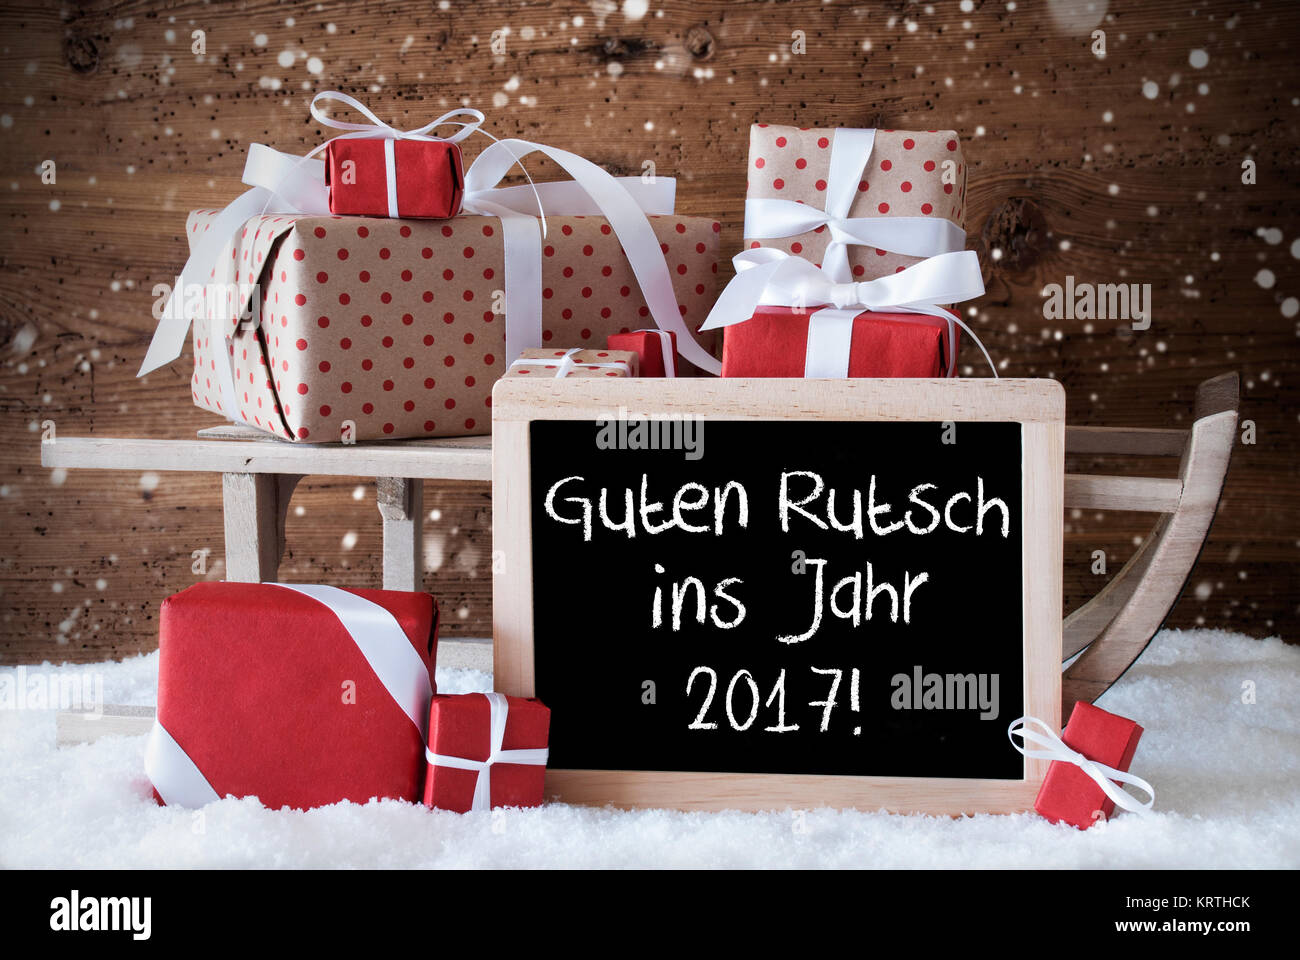 Chalkboard With German Text Guten Rutsch Ins Jahr 2017 Means Happy New Year. Sled With Christmas And Winter Decoration And Snowflakes. Gifts And Presents On Snow With Wooden Background. Stock Photo